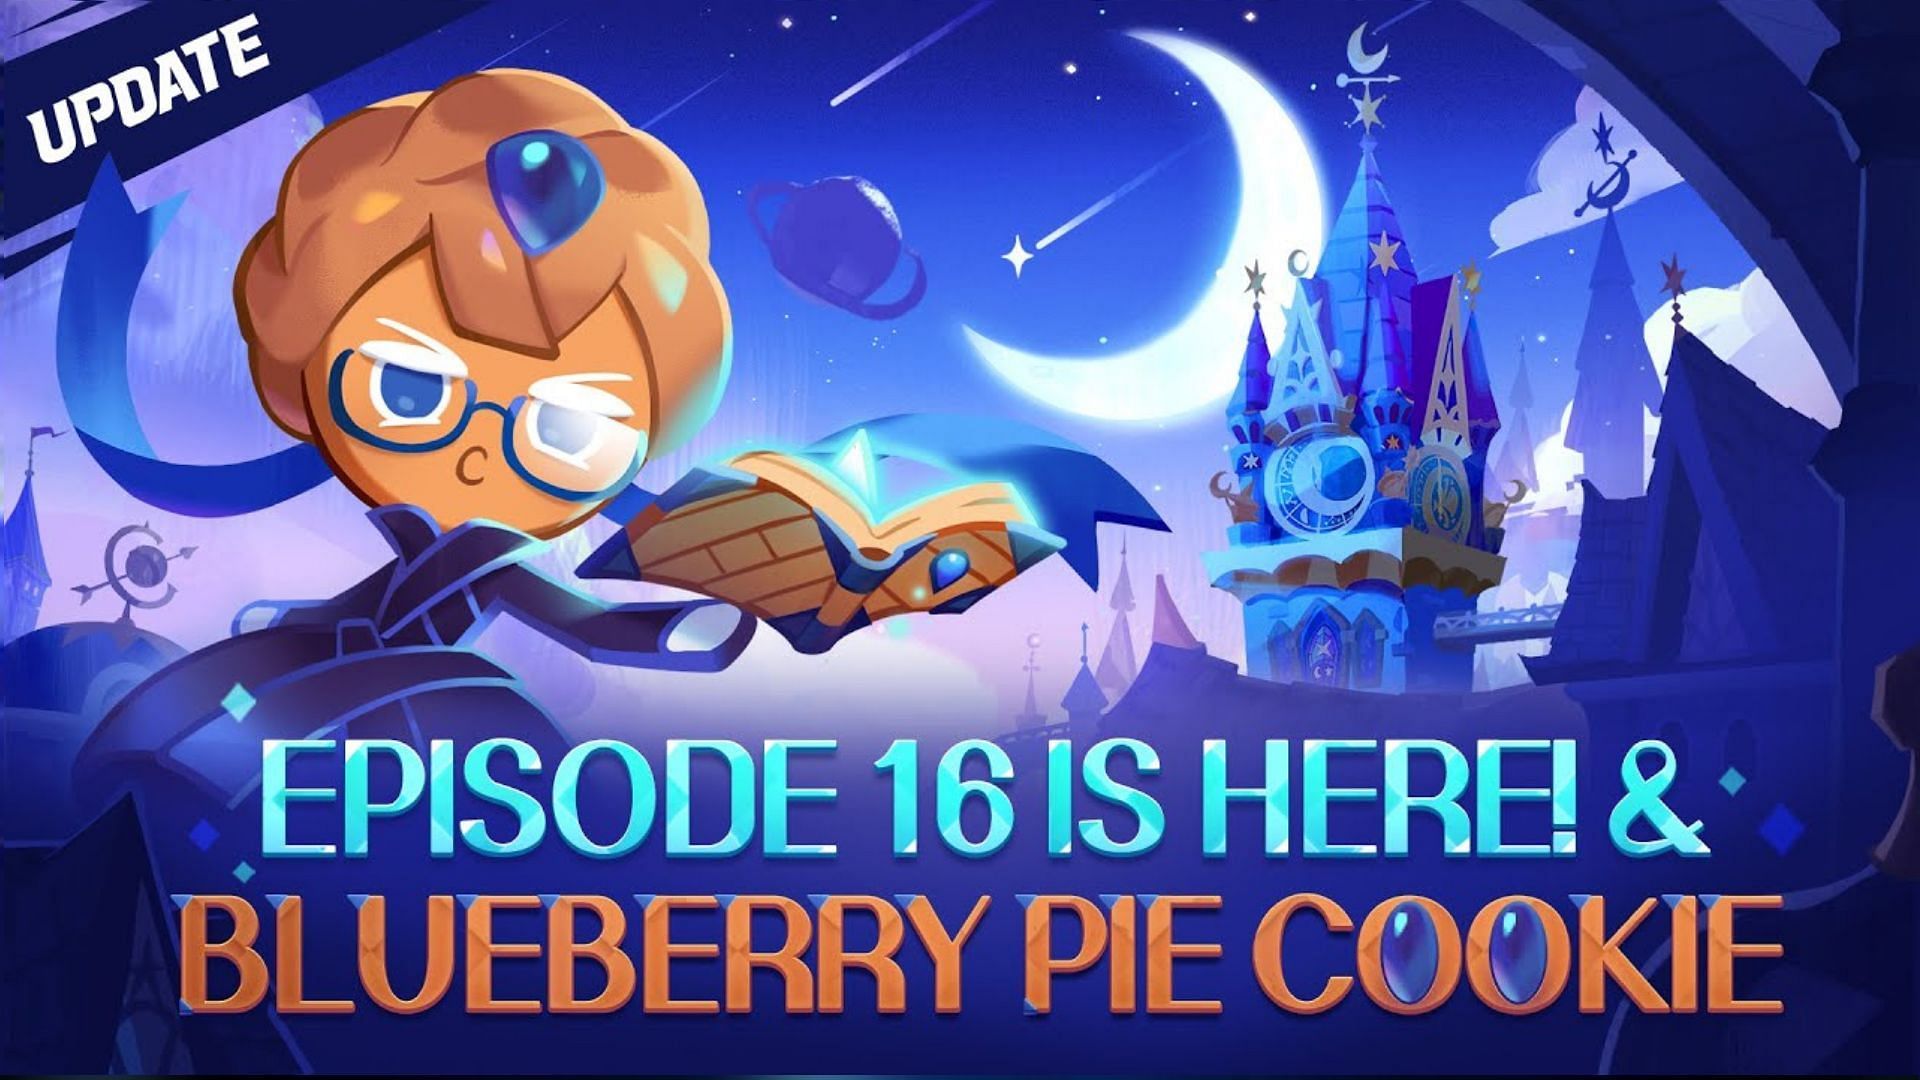 Blueberry Pie Cookie will be the 56th Epic Cookie in the game (Image via CRK/YouTube)